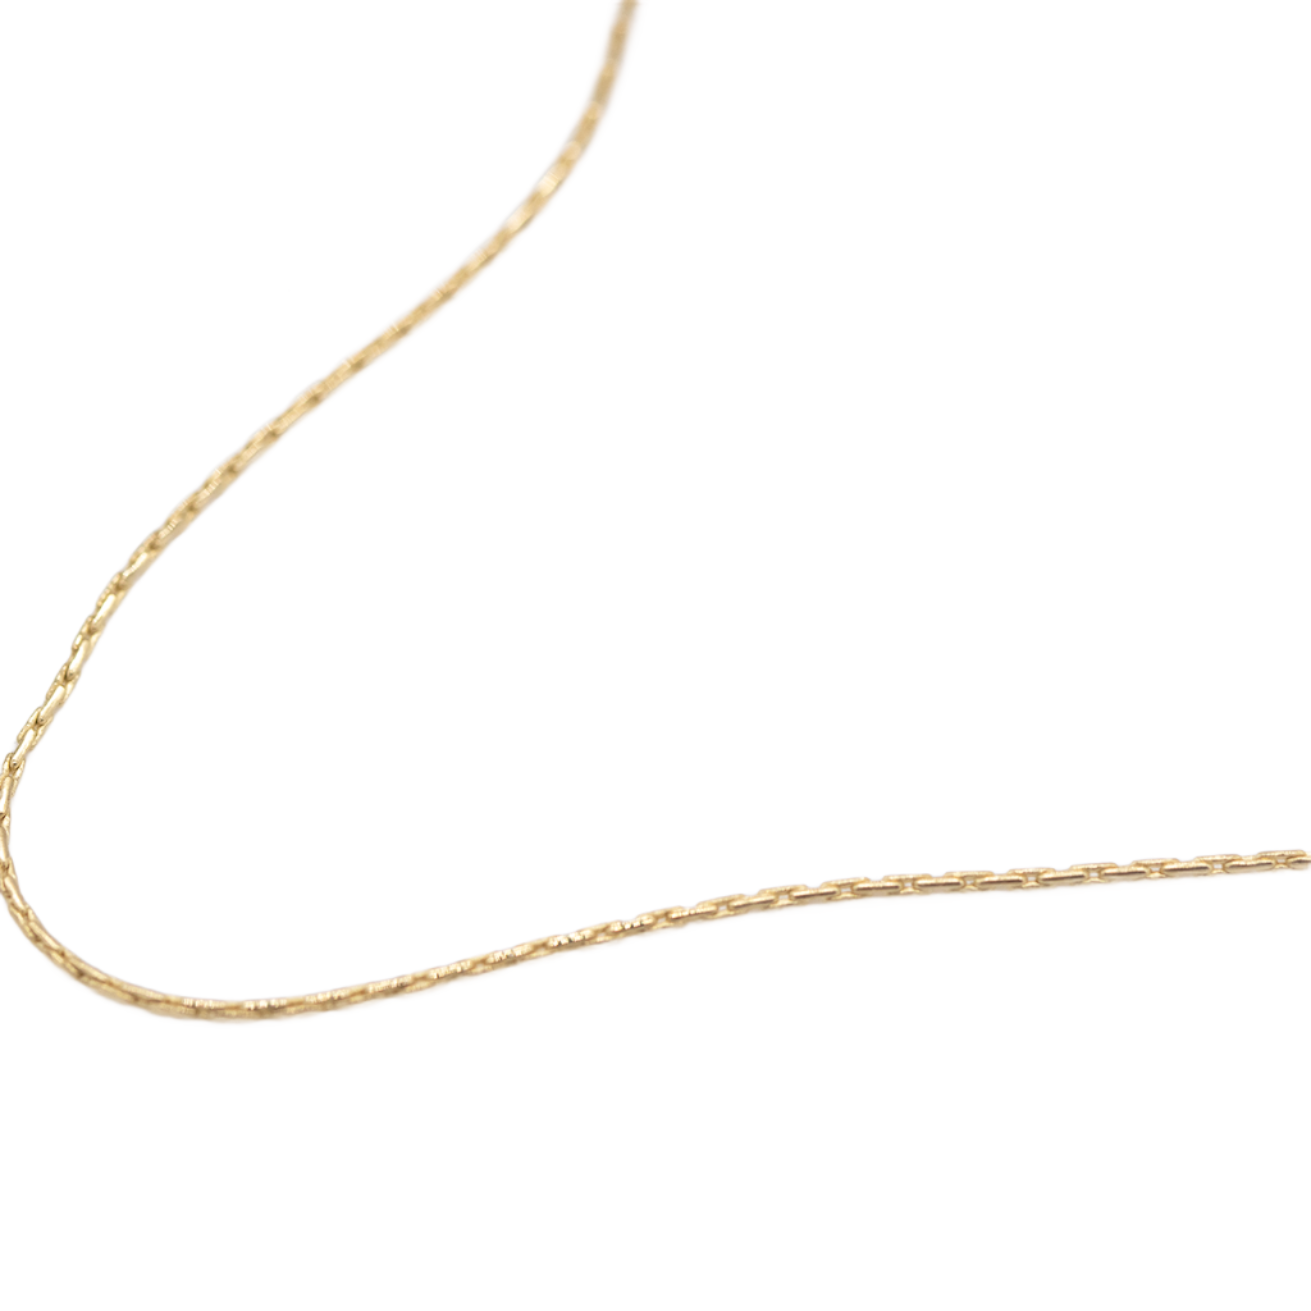 14K SUPER THIN NECKLACE 2.4 GRAMS